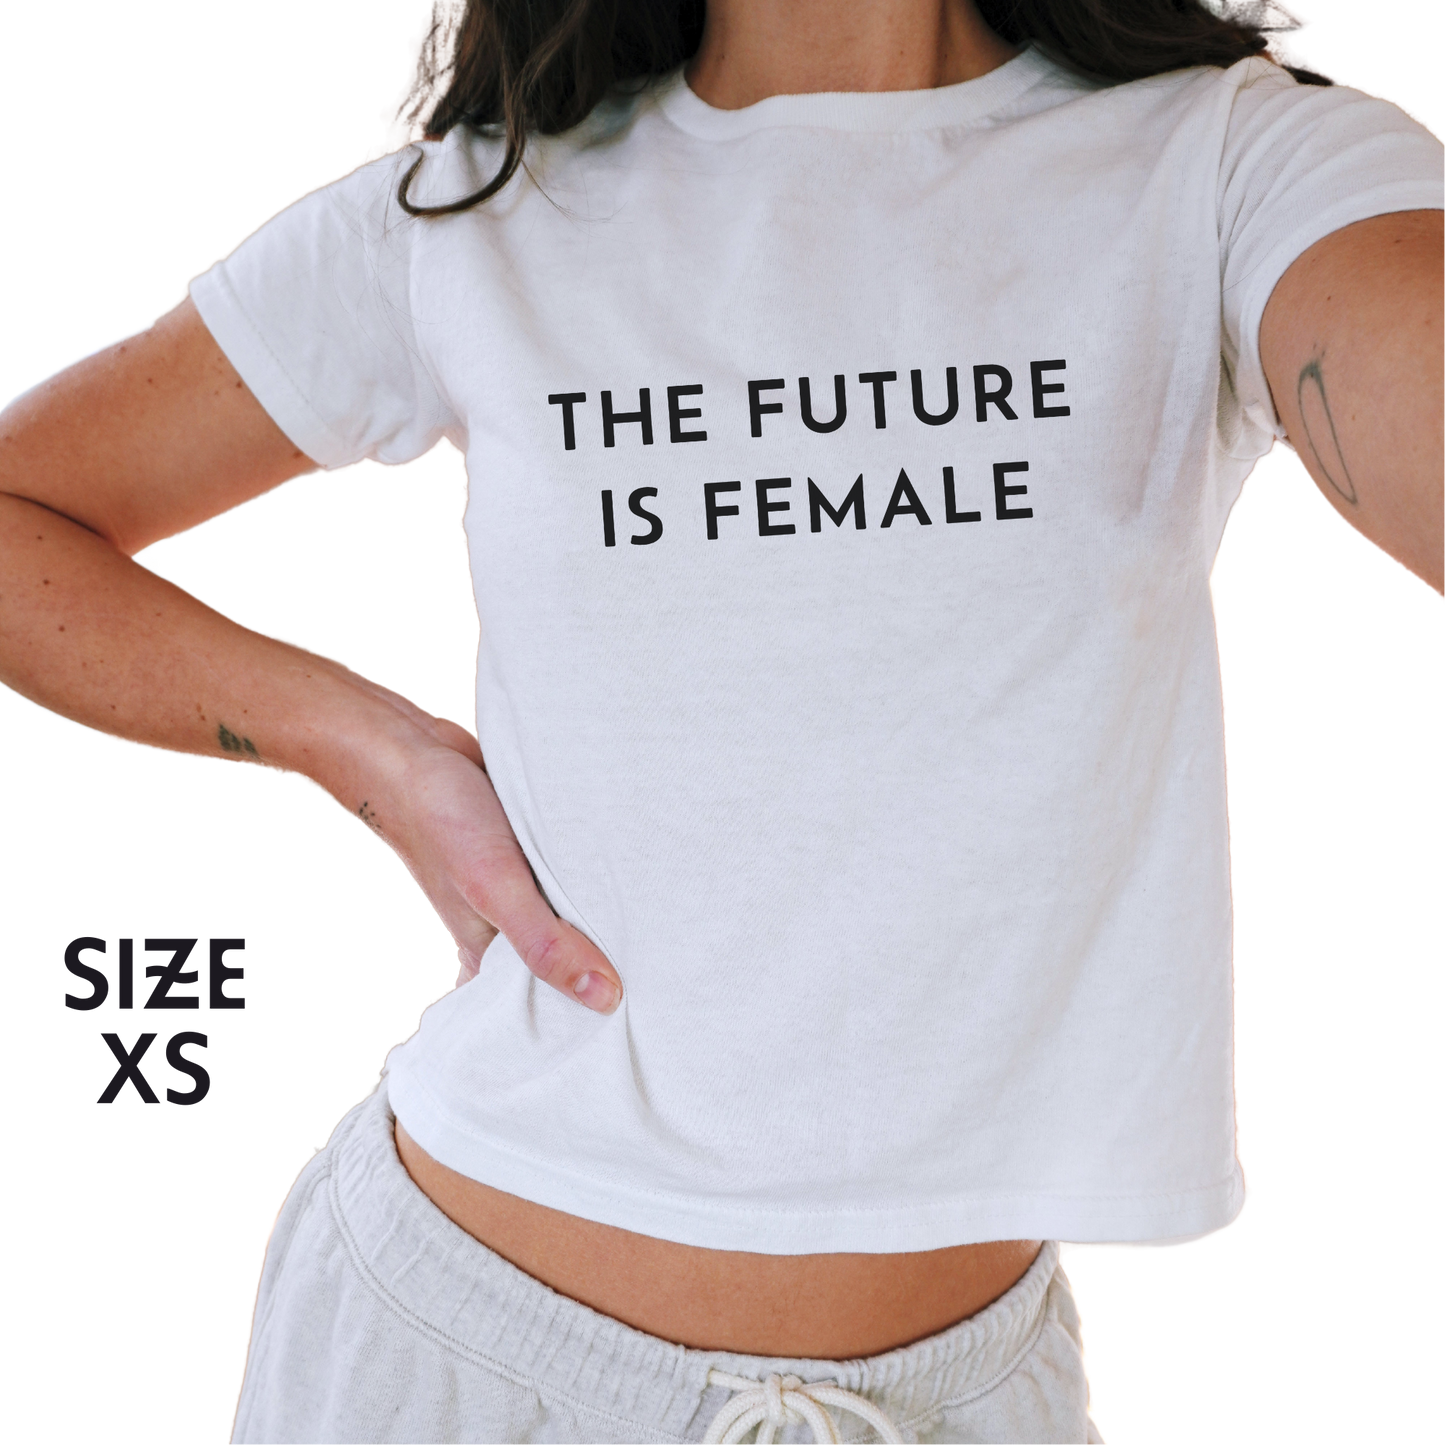 The Future is Female Baby Tee